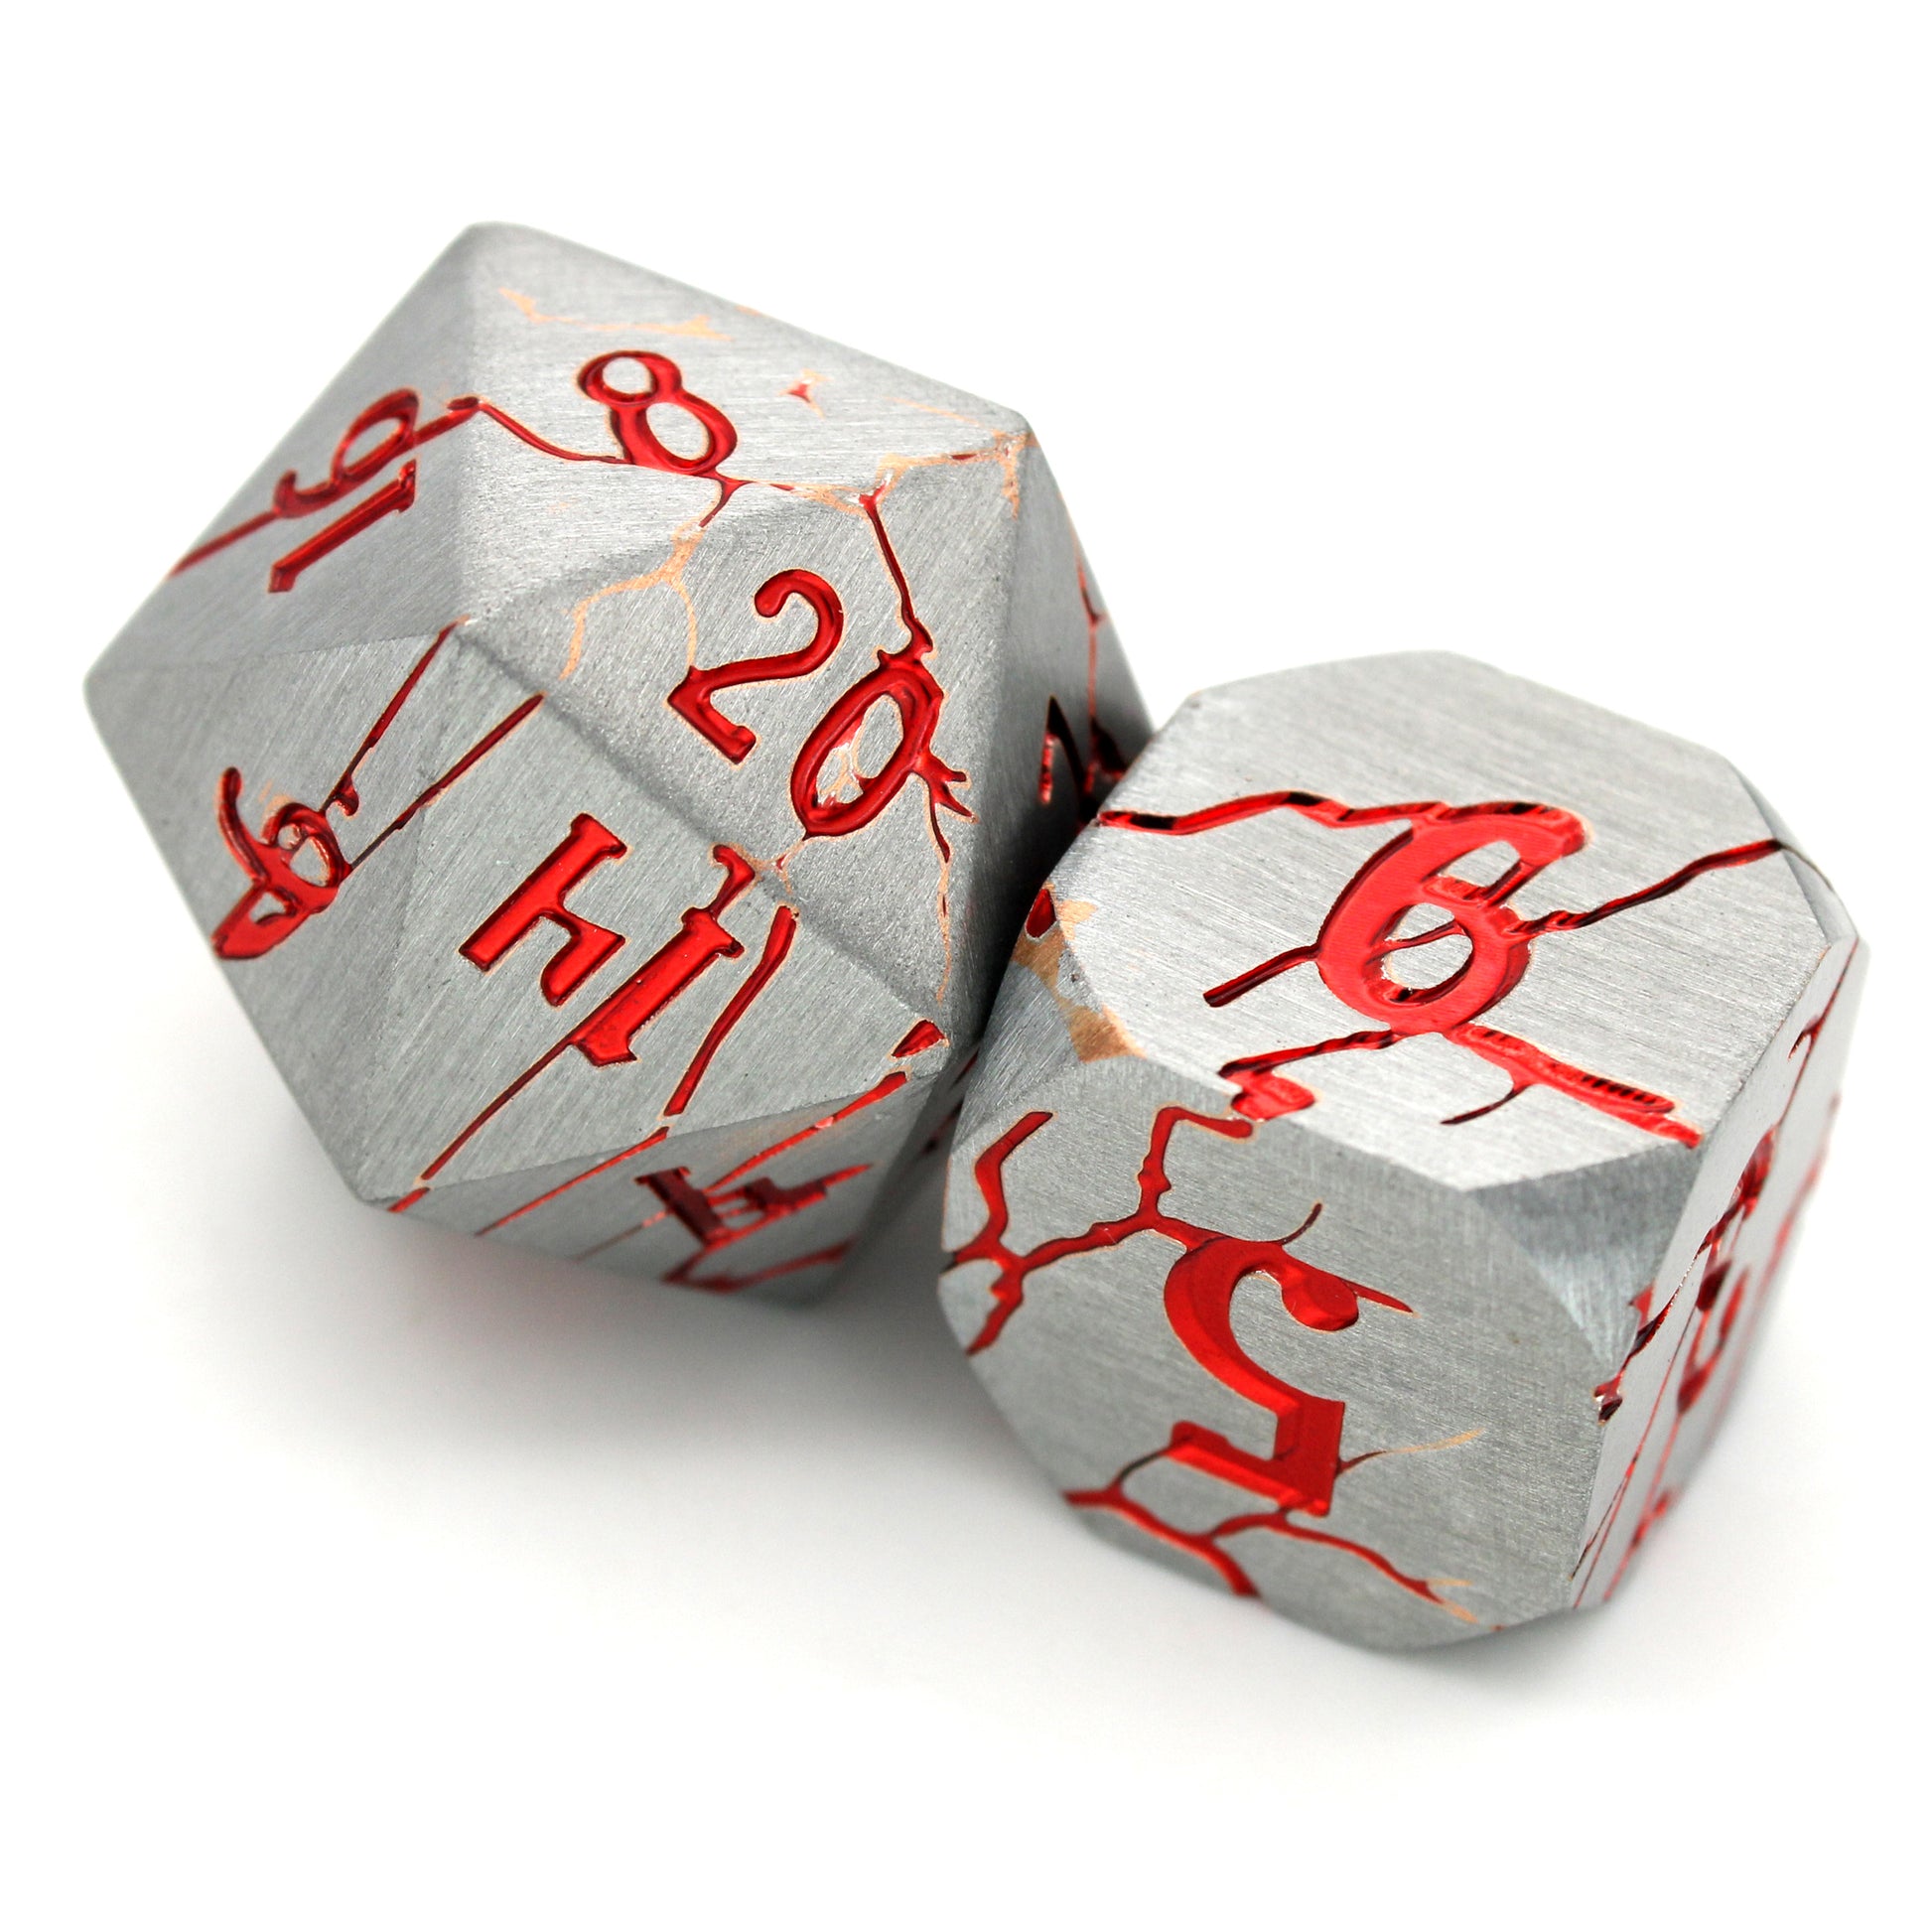 Phlegethos Flame is a 7-piece set of silver dice, featuring cracks and numbers of metallic, fiery red.